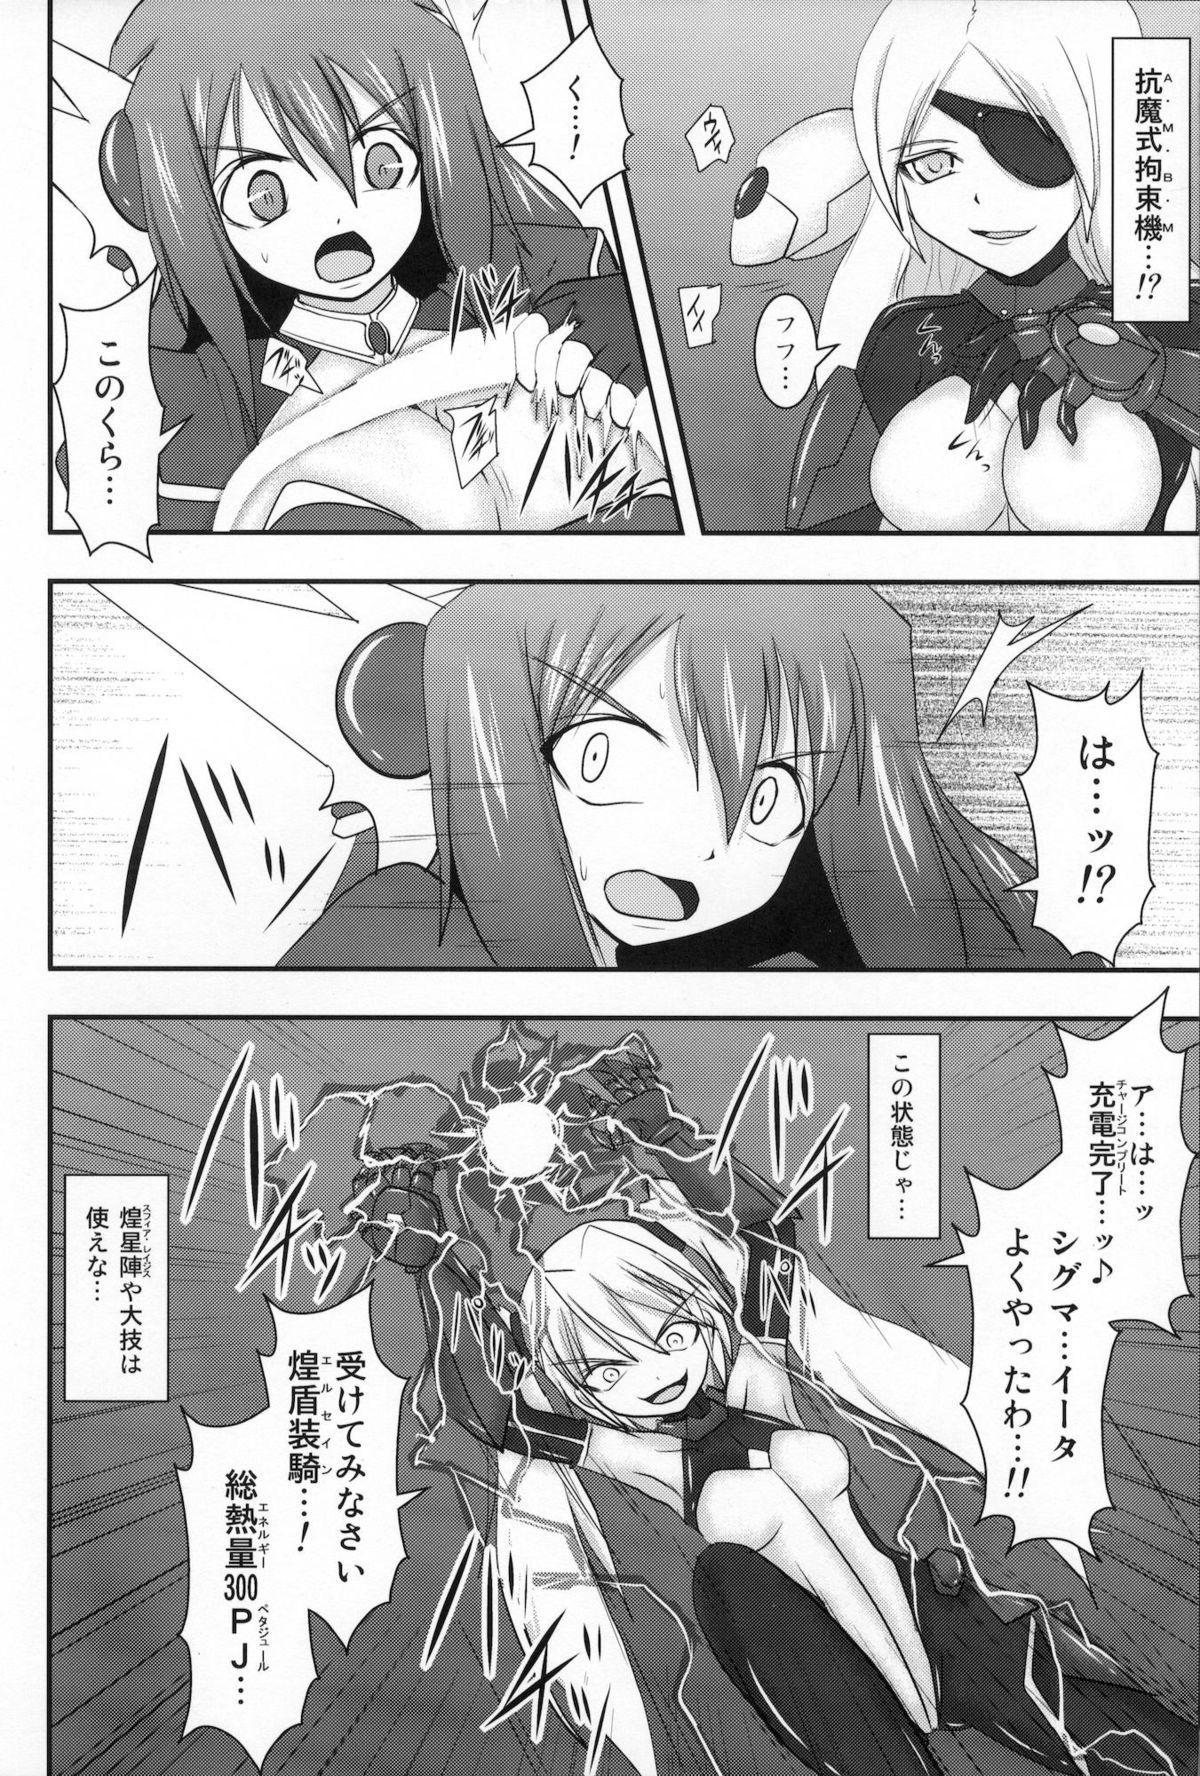 Youporn Shield Knight Elsain Vol. 10 MALICIOUS SISTERS Sex Pussy - Page 5